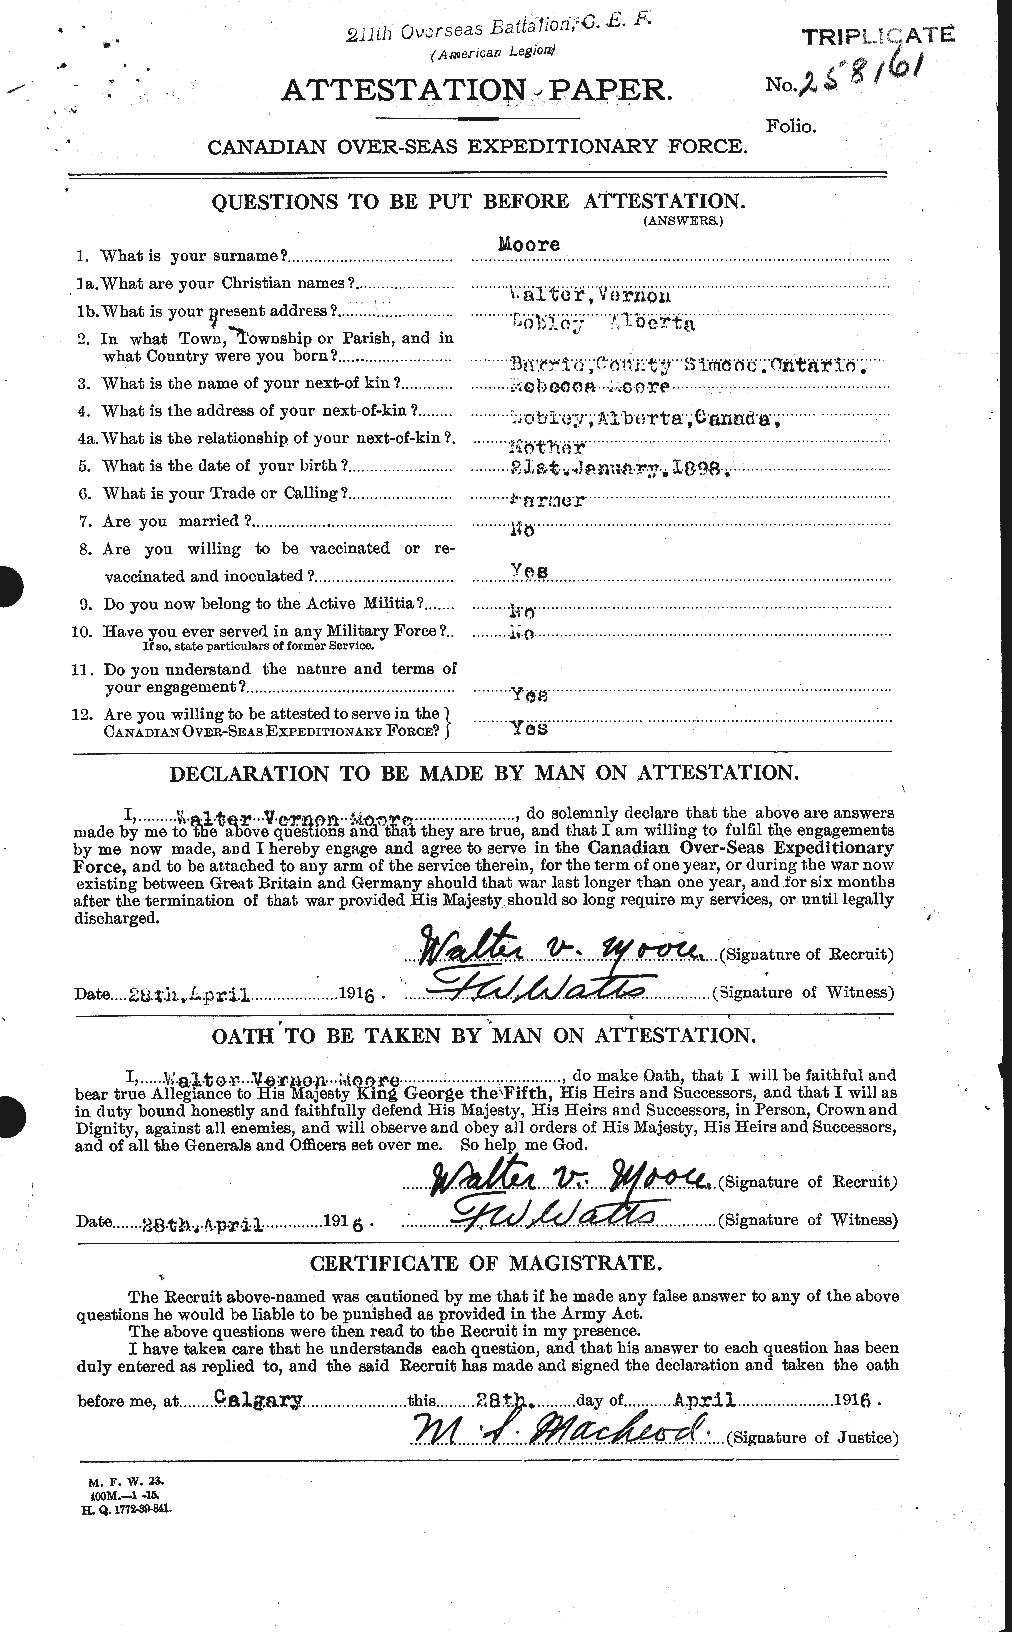 Personnel Records of the First World War - CEF 505720a